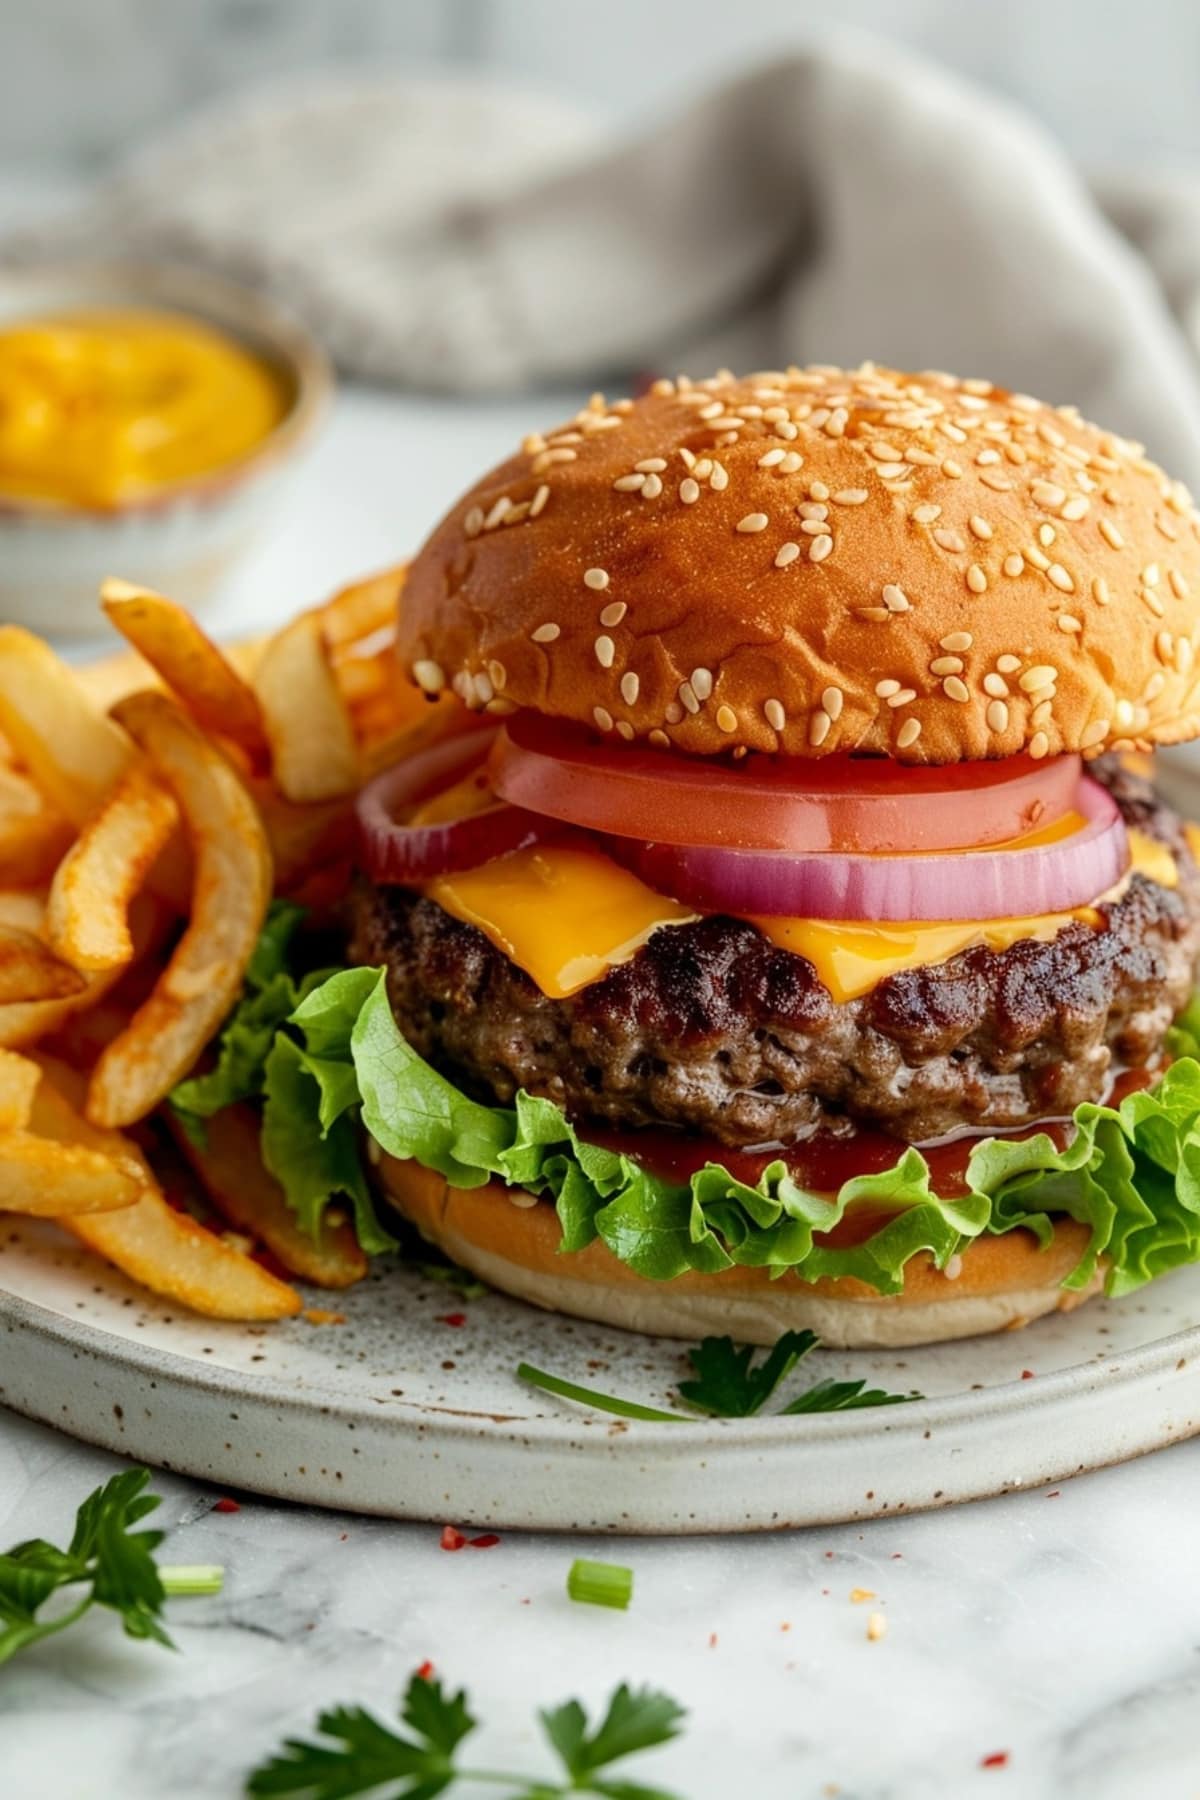 Crack burger with thick patty, sliced tomato, red onions, sliced cheese and lettuce served with fries.
